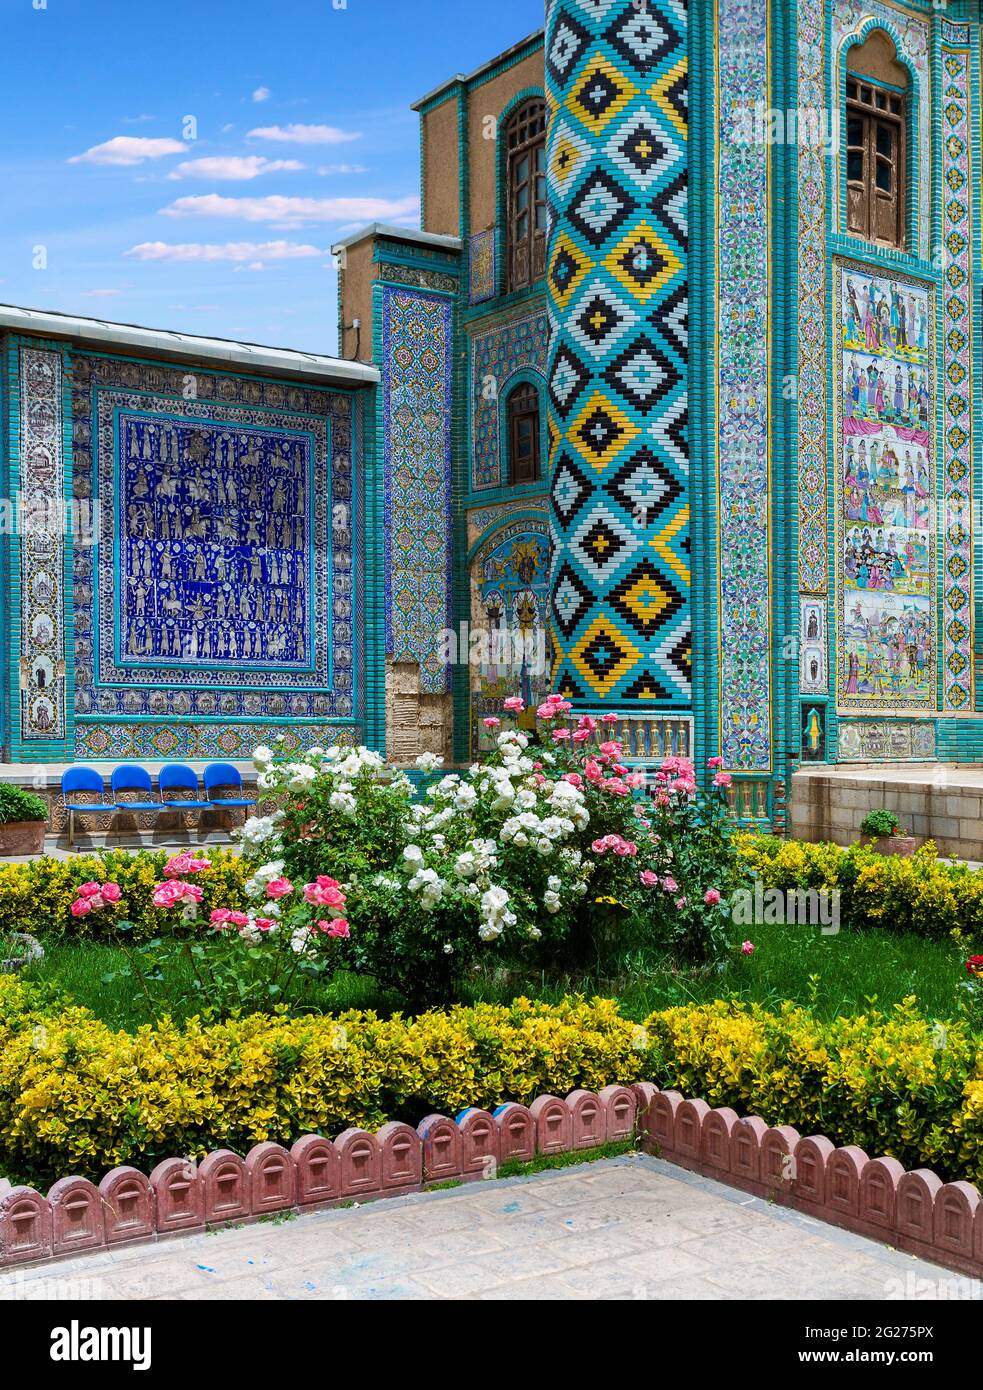 Tekiyeh Moaven ol-Molk ( Tekieh Moaven ) built in 1897 in Kermanshah.The structure is known for its dramatic and colorful tile mosaic panels. Stock Photo